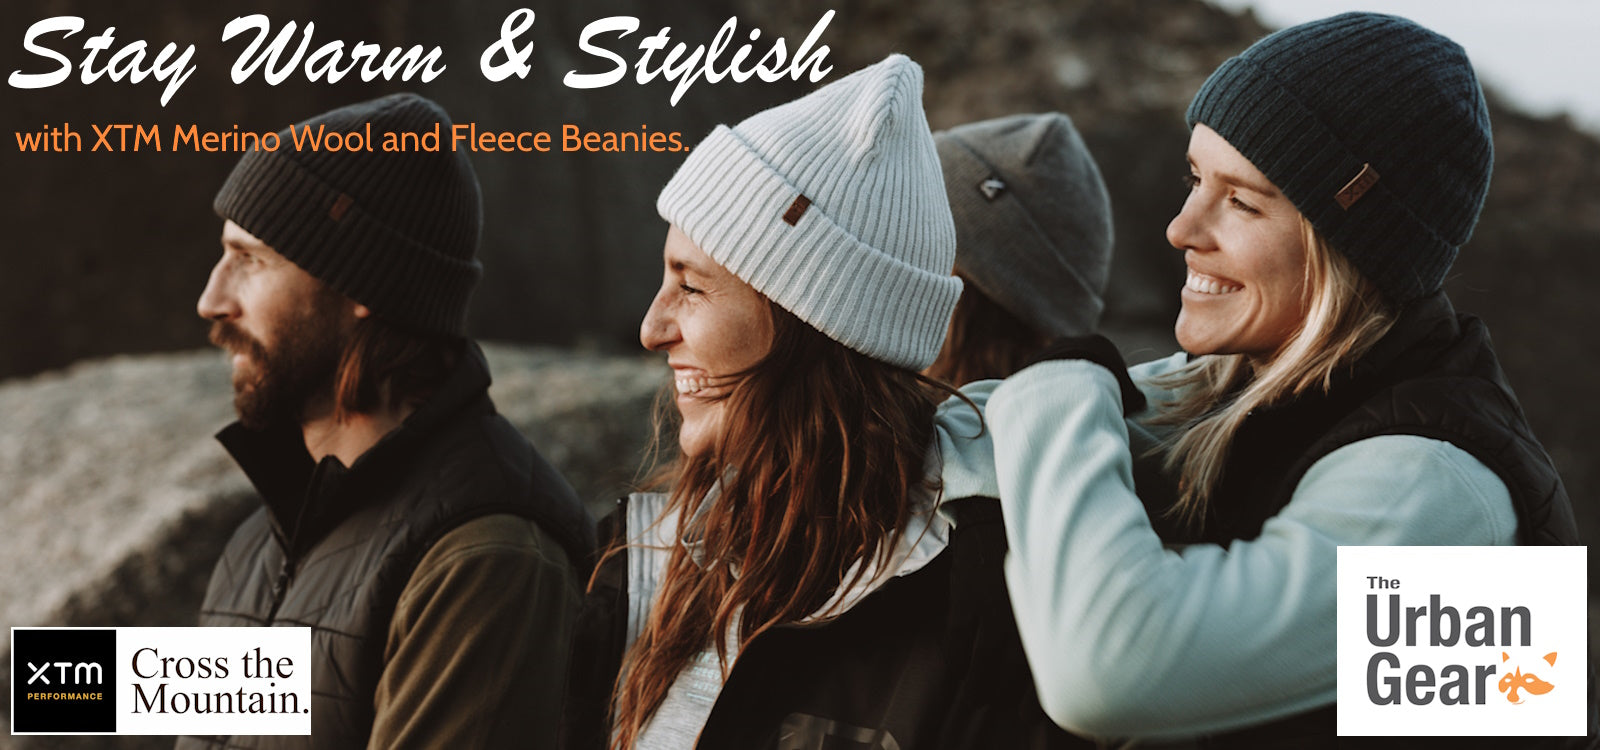 Stay Warm and Stylish with XTM Merino Wool and Fleece Beanies